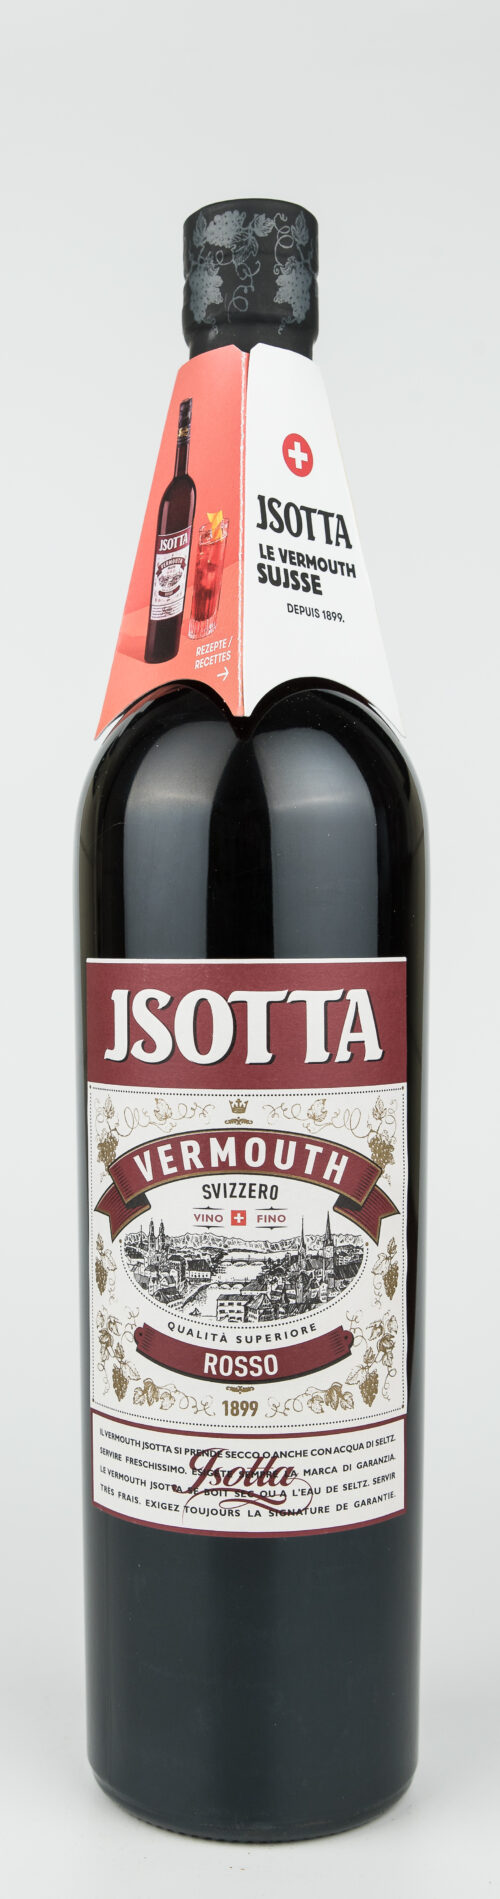 Jsotta Vermouth rosso